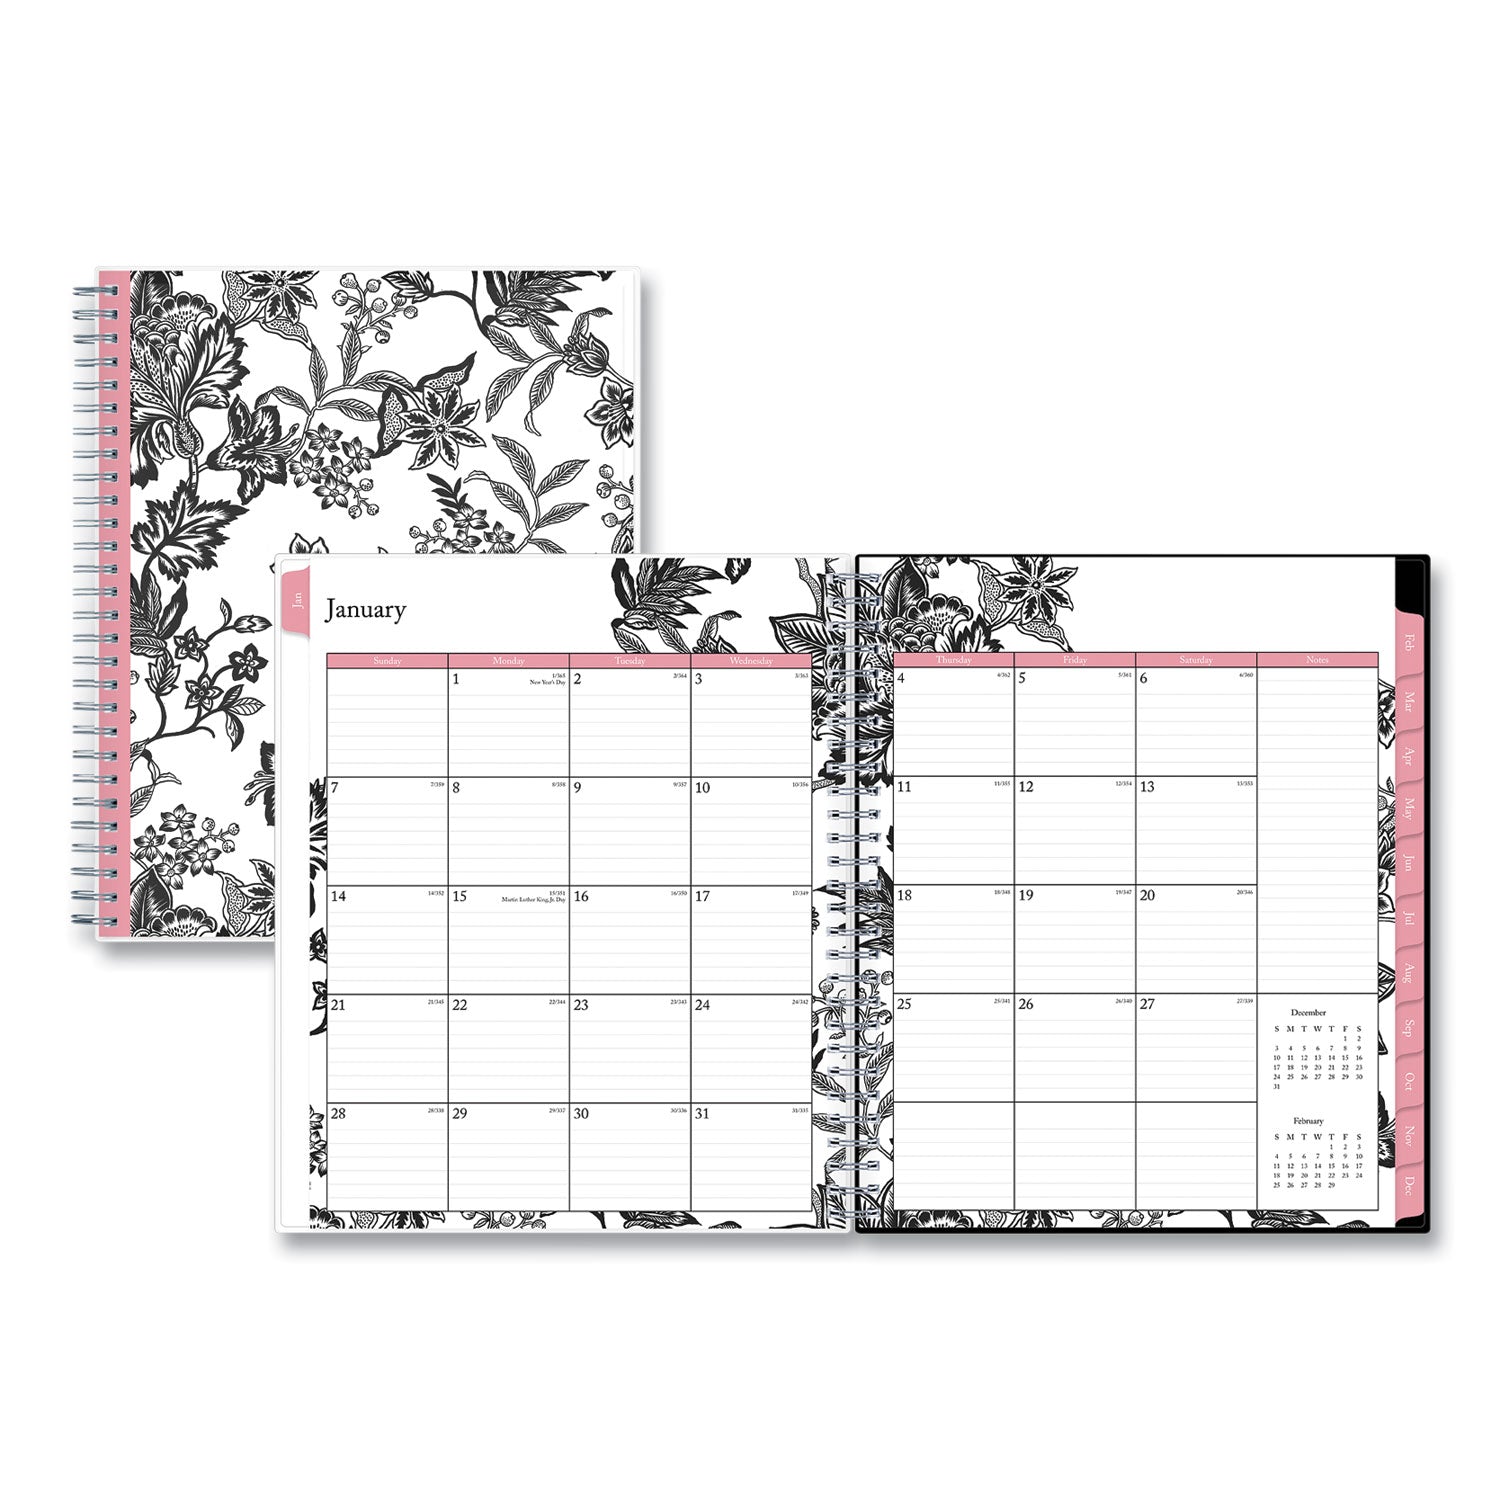 analeis-monthly-planner-analeis-floral-artwork-10-x-8-white-black-coral-cover-12-month-jan-to-dec-2024_bls100004 - 1